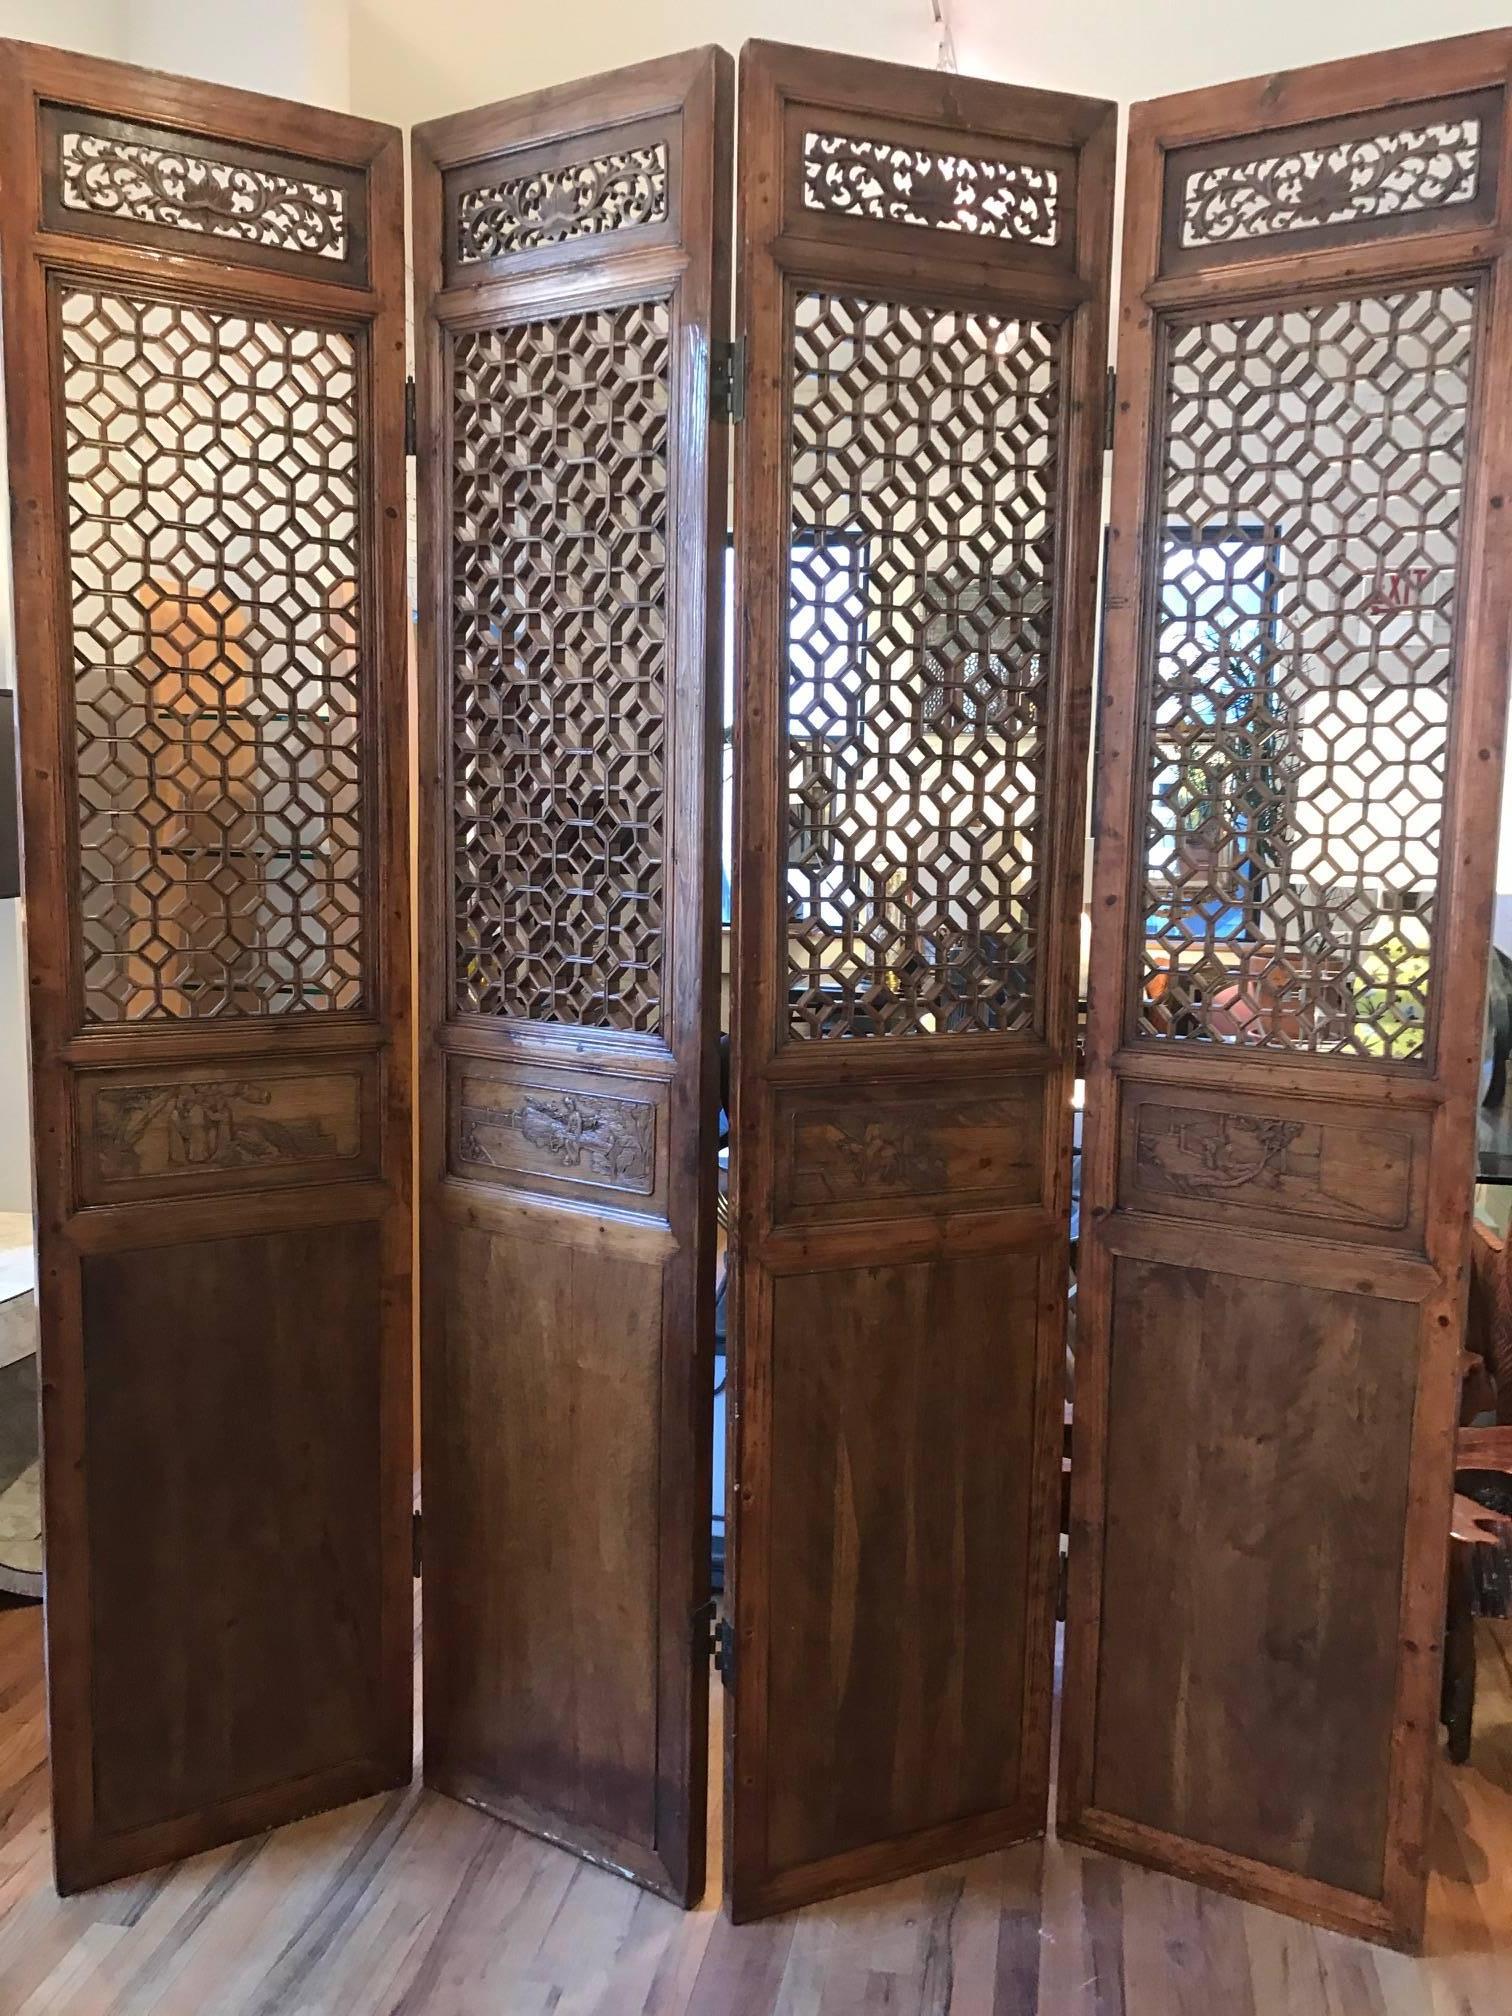 Set of four Chinese courtyard doors. Each screen has an intricate geometric lattice top panel above a solid bottom panel. Each door has a central unique carved panel in low relief. Exquisite mortice and tenons joinery. These screens are mid-19th